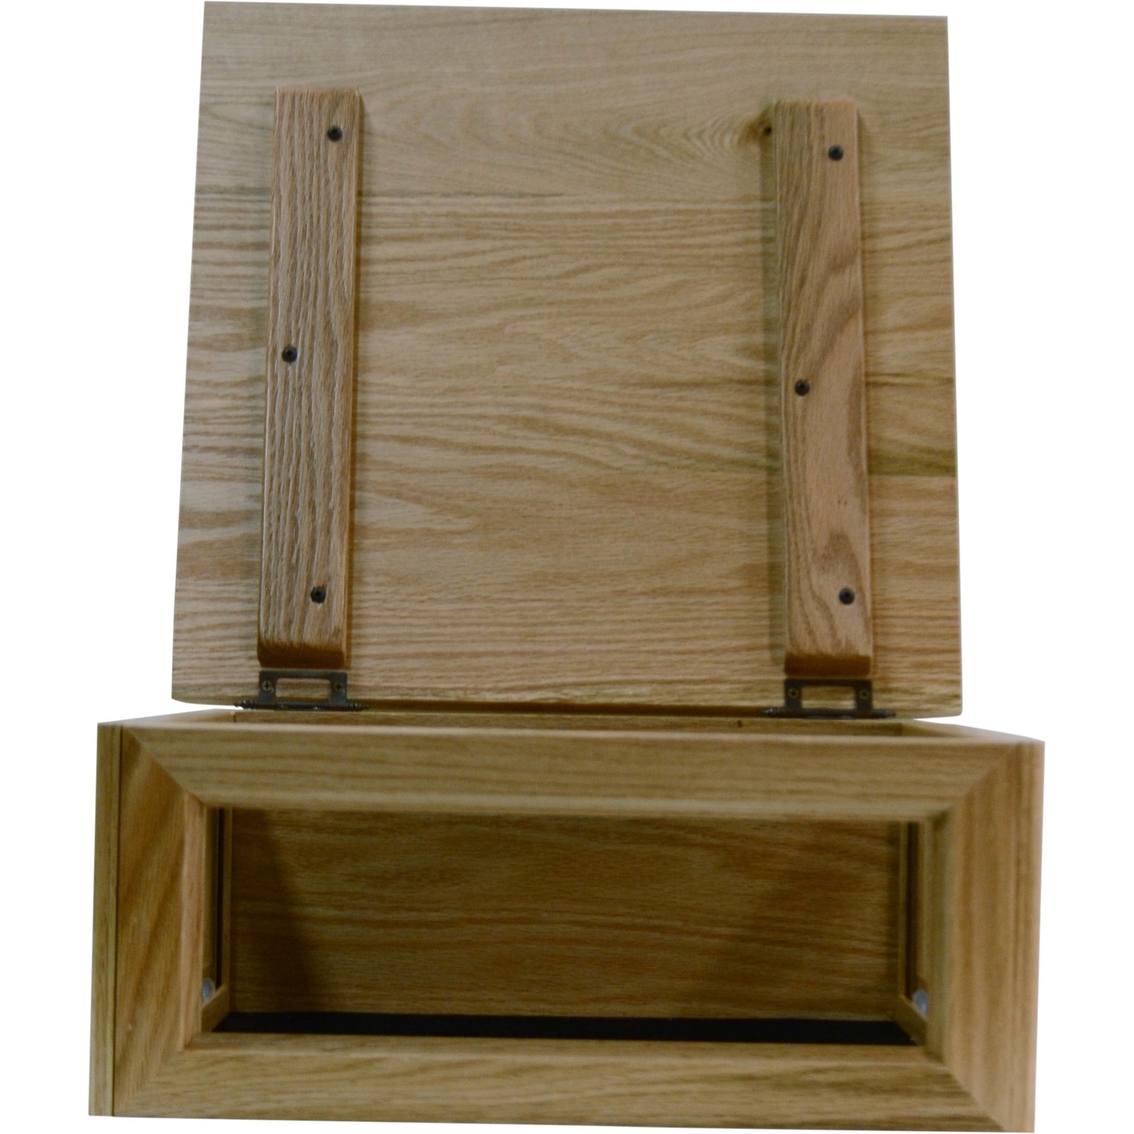 DomEx Hardwoods Hat/Cover Box, Solid Top, Oak - Image 3 of 3